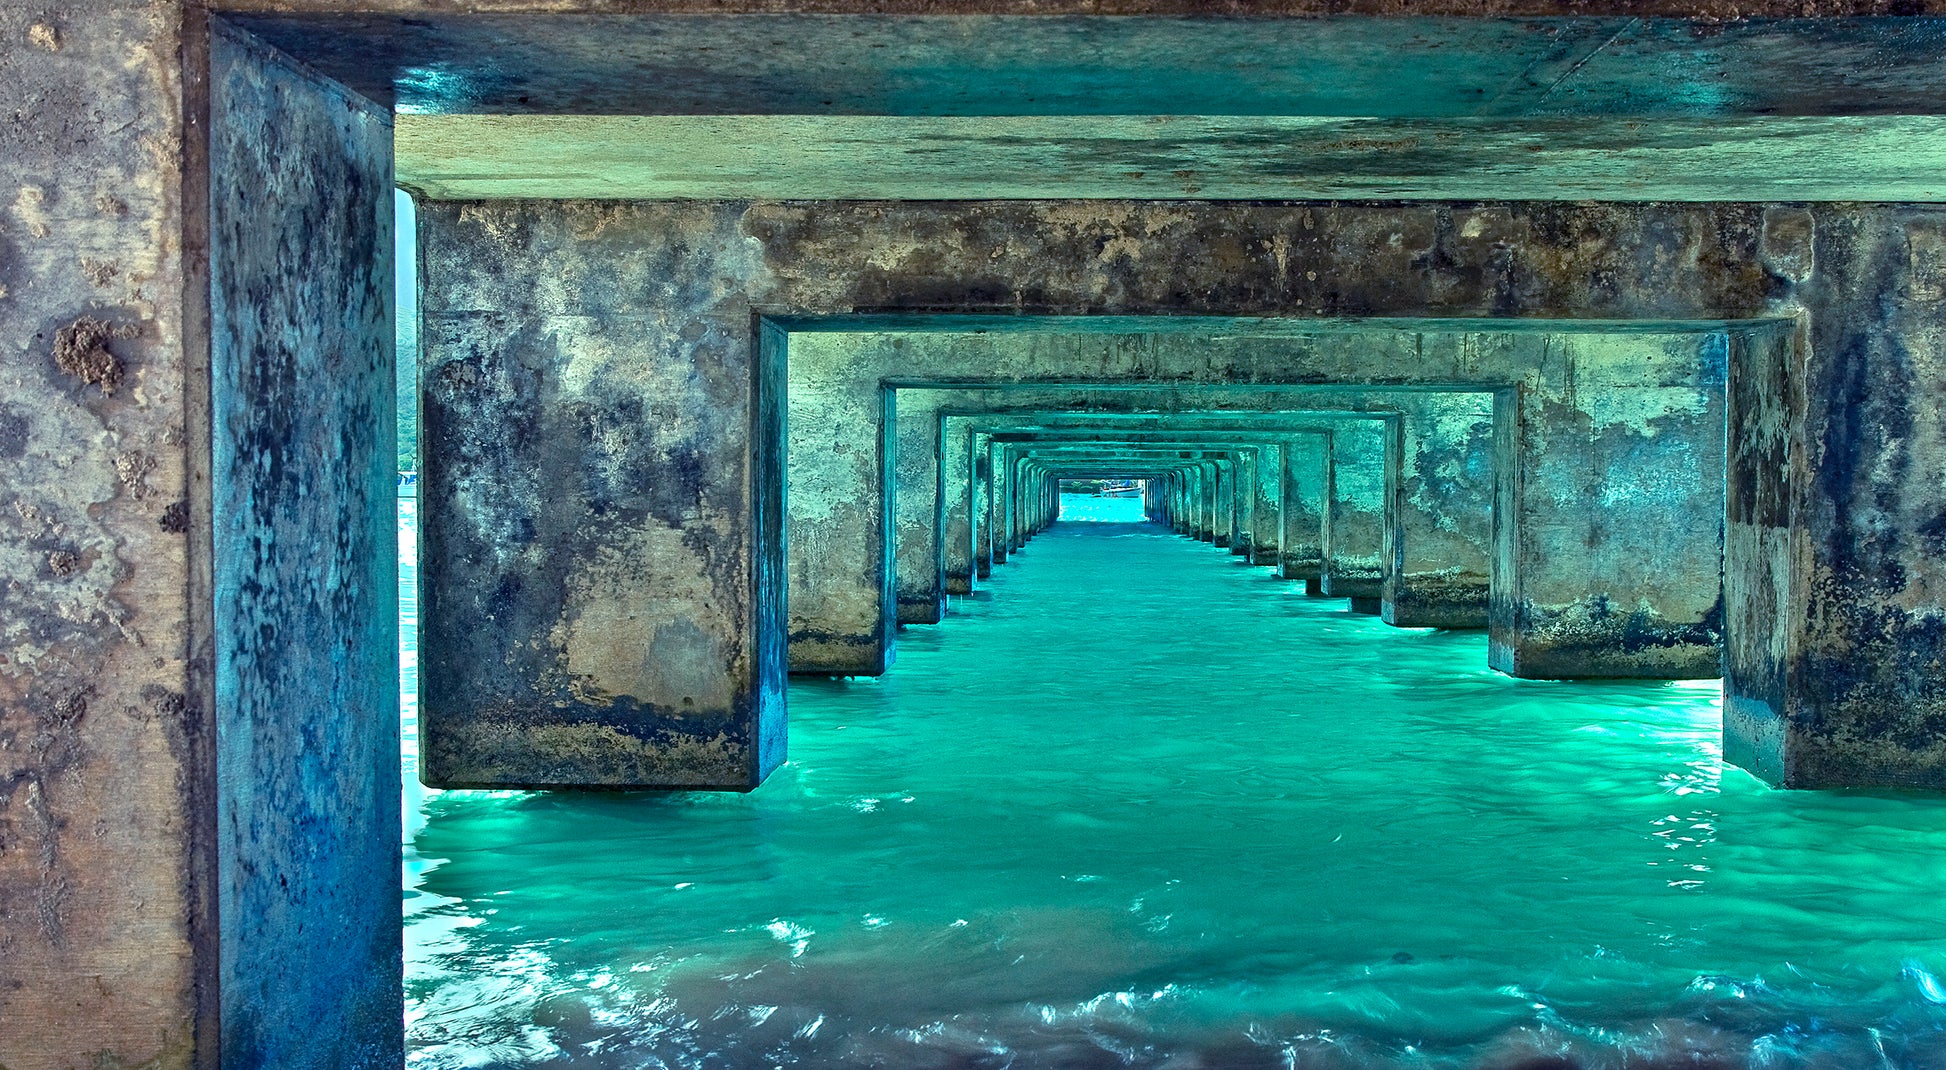 Fine art photograph taken under Kauai’s Hanalei Pier. The bright turquoise water reflects on the rustic concrete underside of the pier as it angles out toward the ocean. Photograph by Inspiring Images Hawaii. 